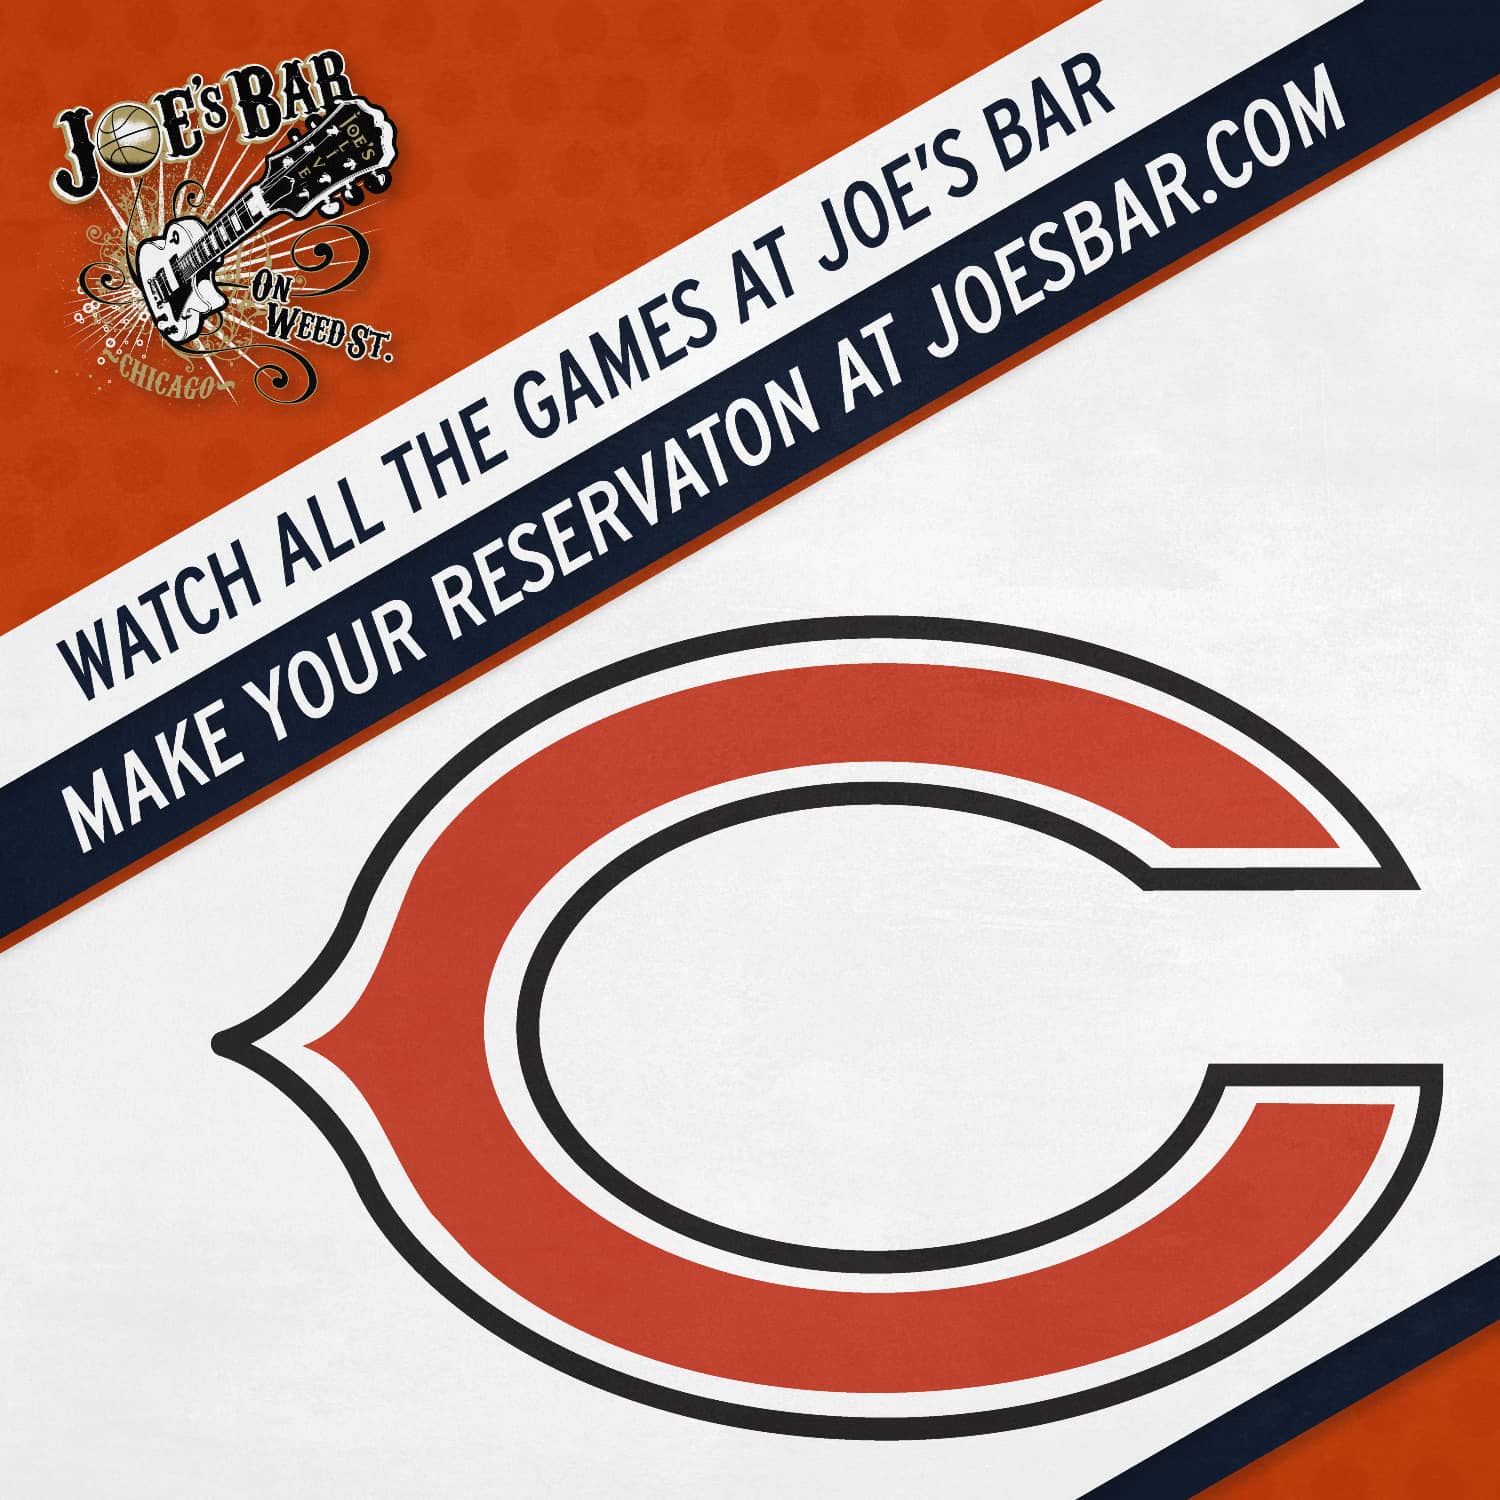 Chicago Bears Reservation at Joe's on Weed St. Poster